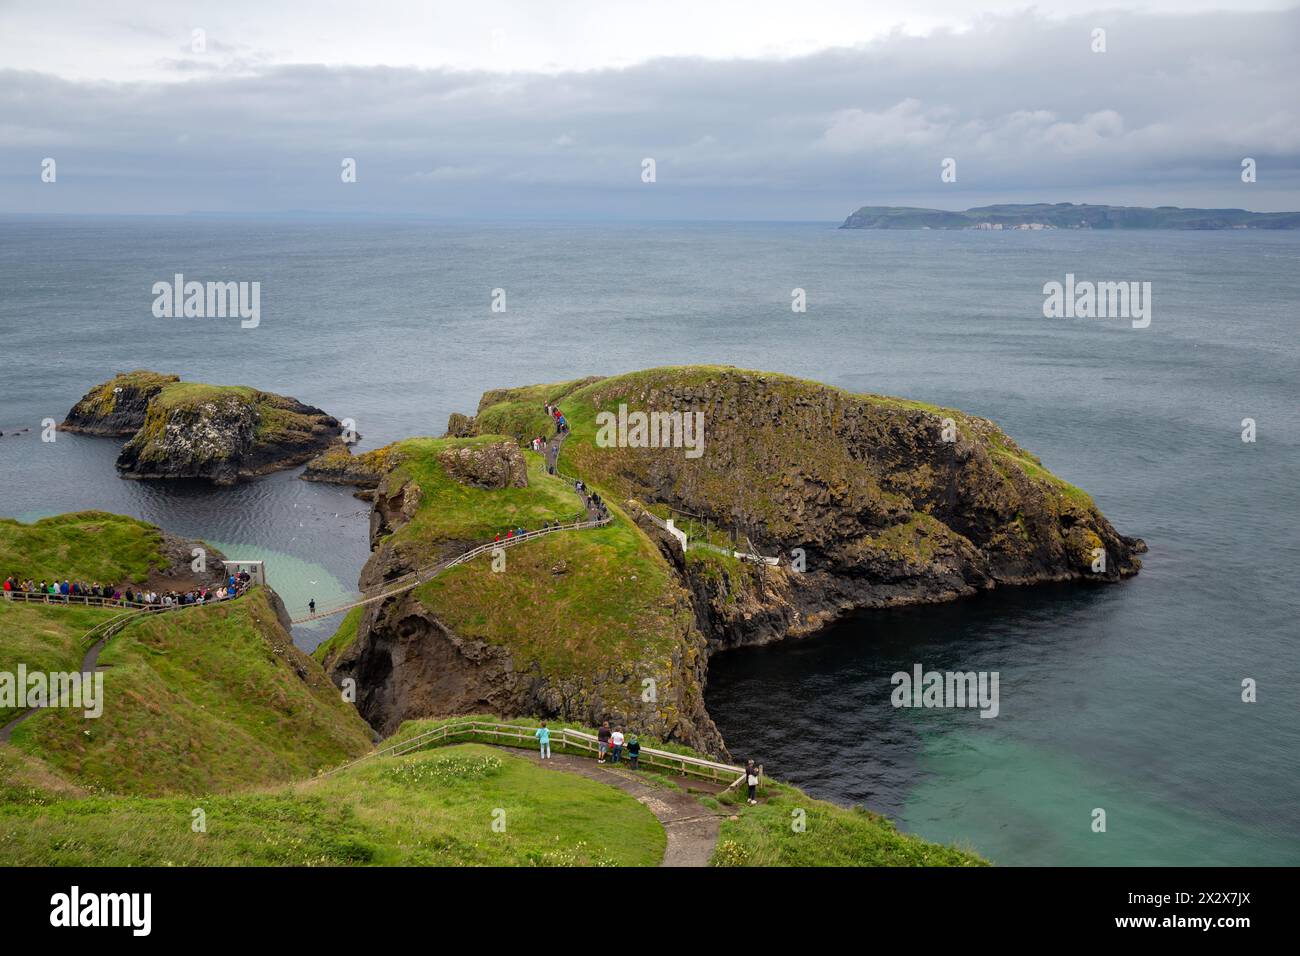 17.07.2019, Ballycastle, Northern Ireland, United Kingdom - Carrick-a-Rede Harbour Bridge, a link between Carrick Island (R) and the mainland (Atlanti Stock Photo